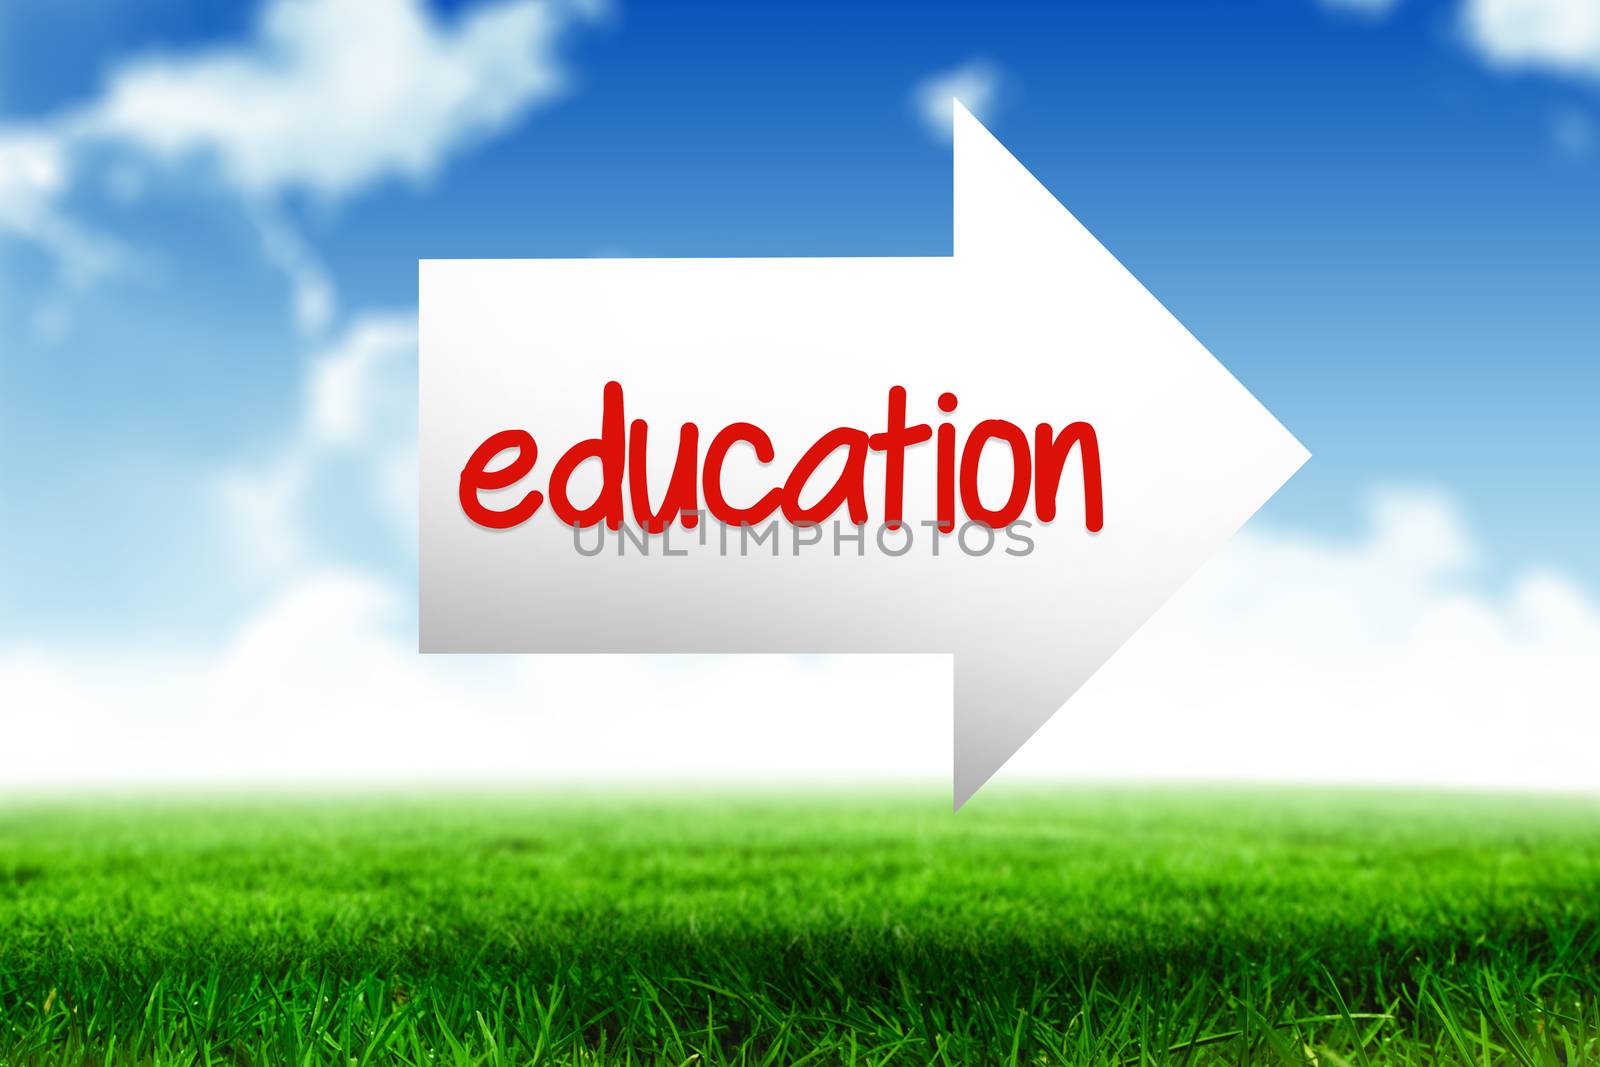 The word education and arrow against blue sky over green field